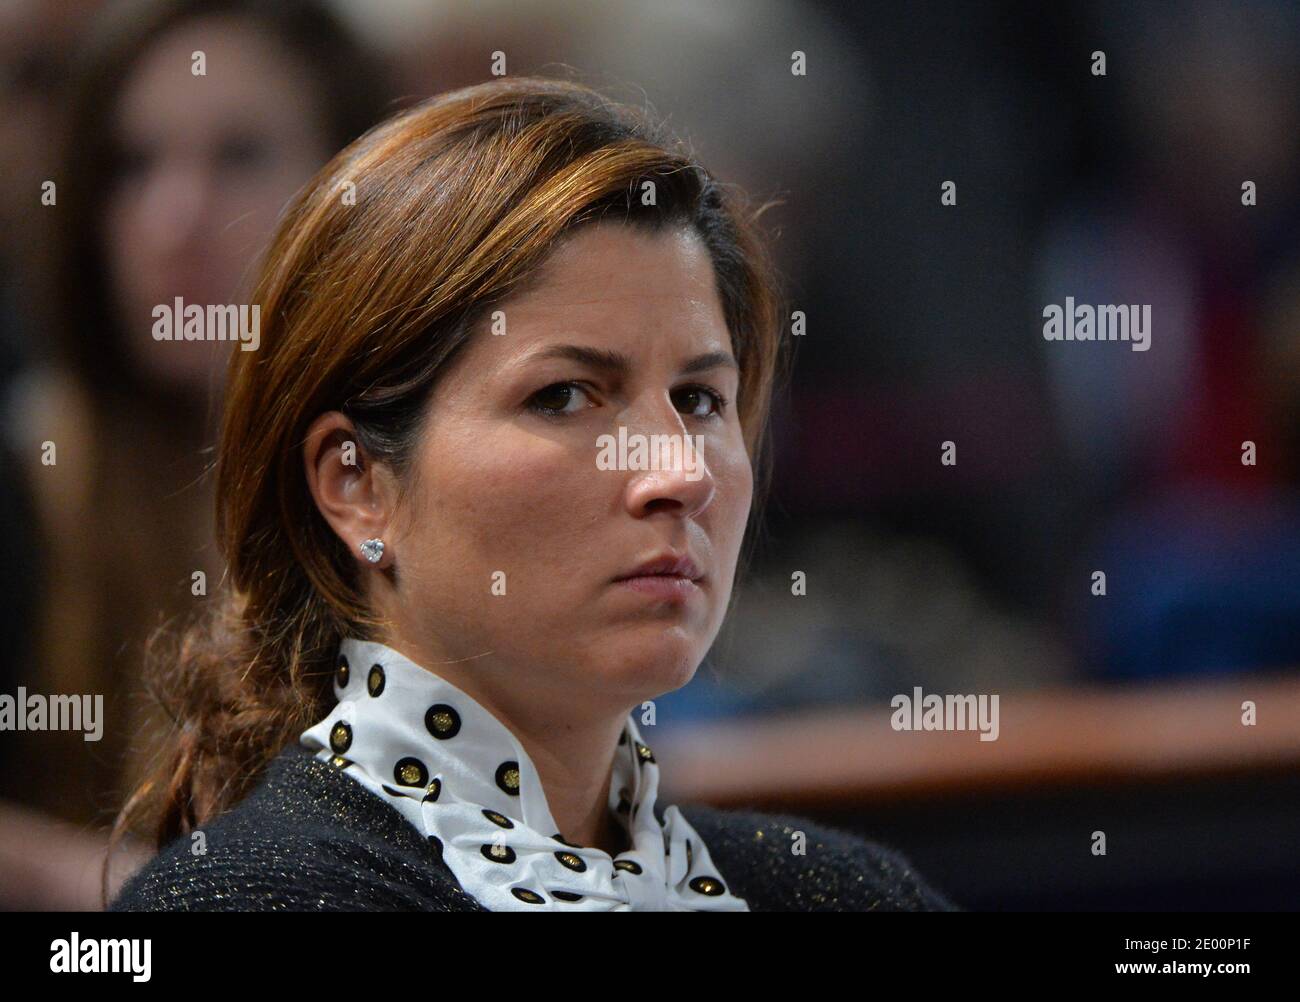 Roger Federer wife Mirka Vavrinec attends the BNP Paribas Masters Series Tennis Open 2013 at Palais Omnisports of Paris-Bercy in Paris, France on October 31st, 2013.photo by Christian Liewig/ABACAPRESS.COM Stock Photo